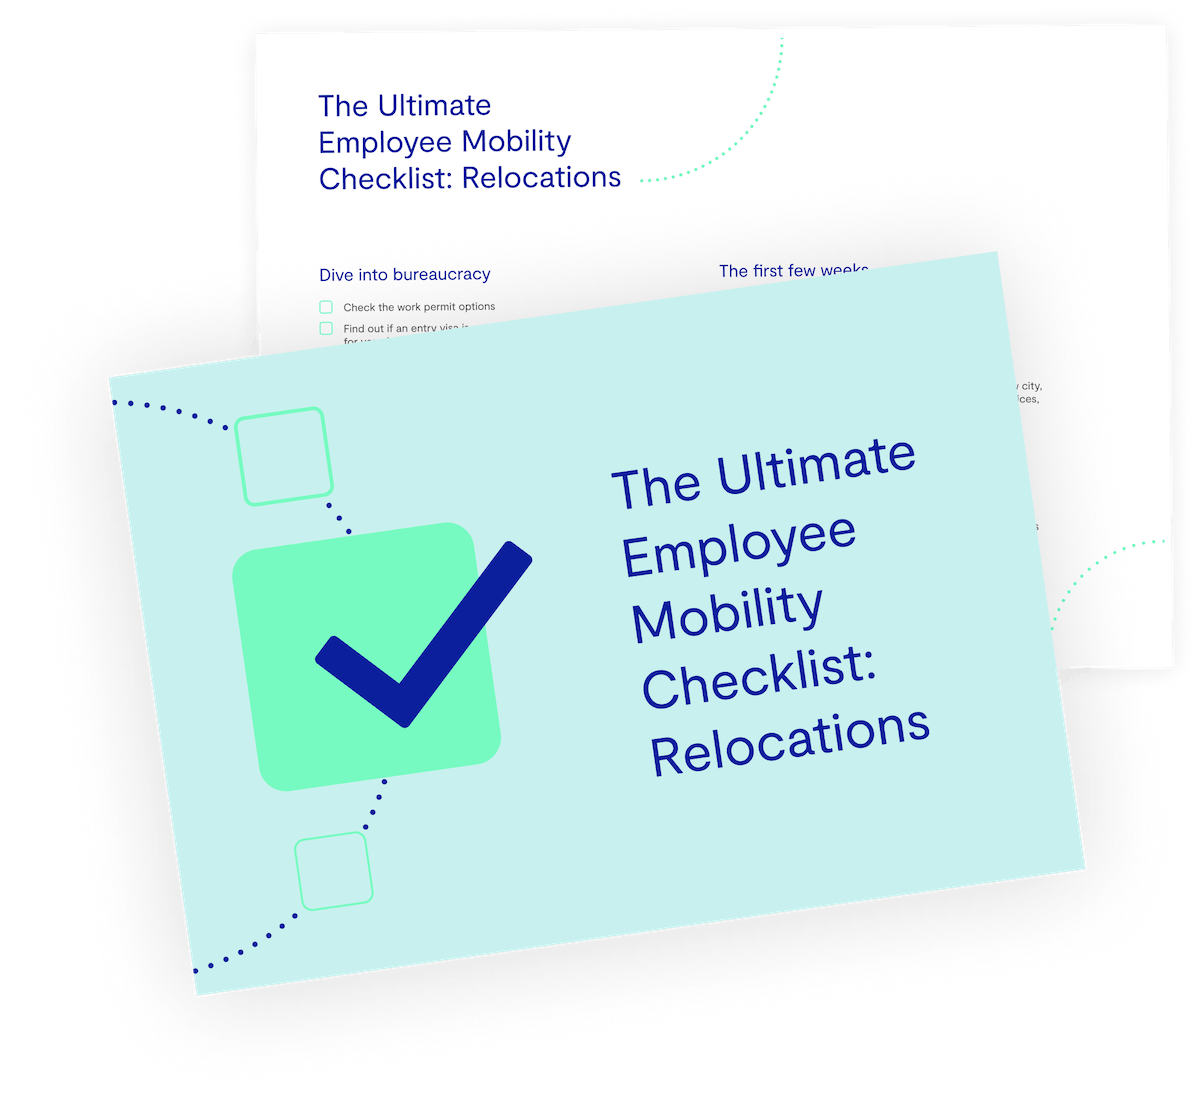 The Ultimate Employee Mobility Checklist: Relocations